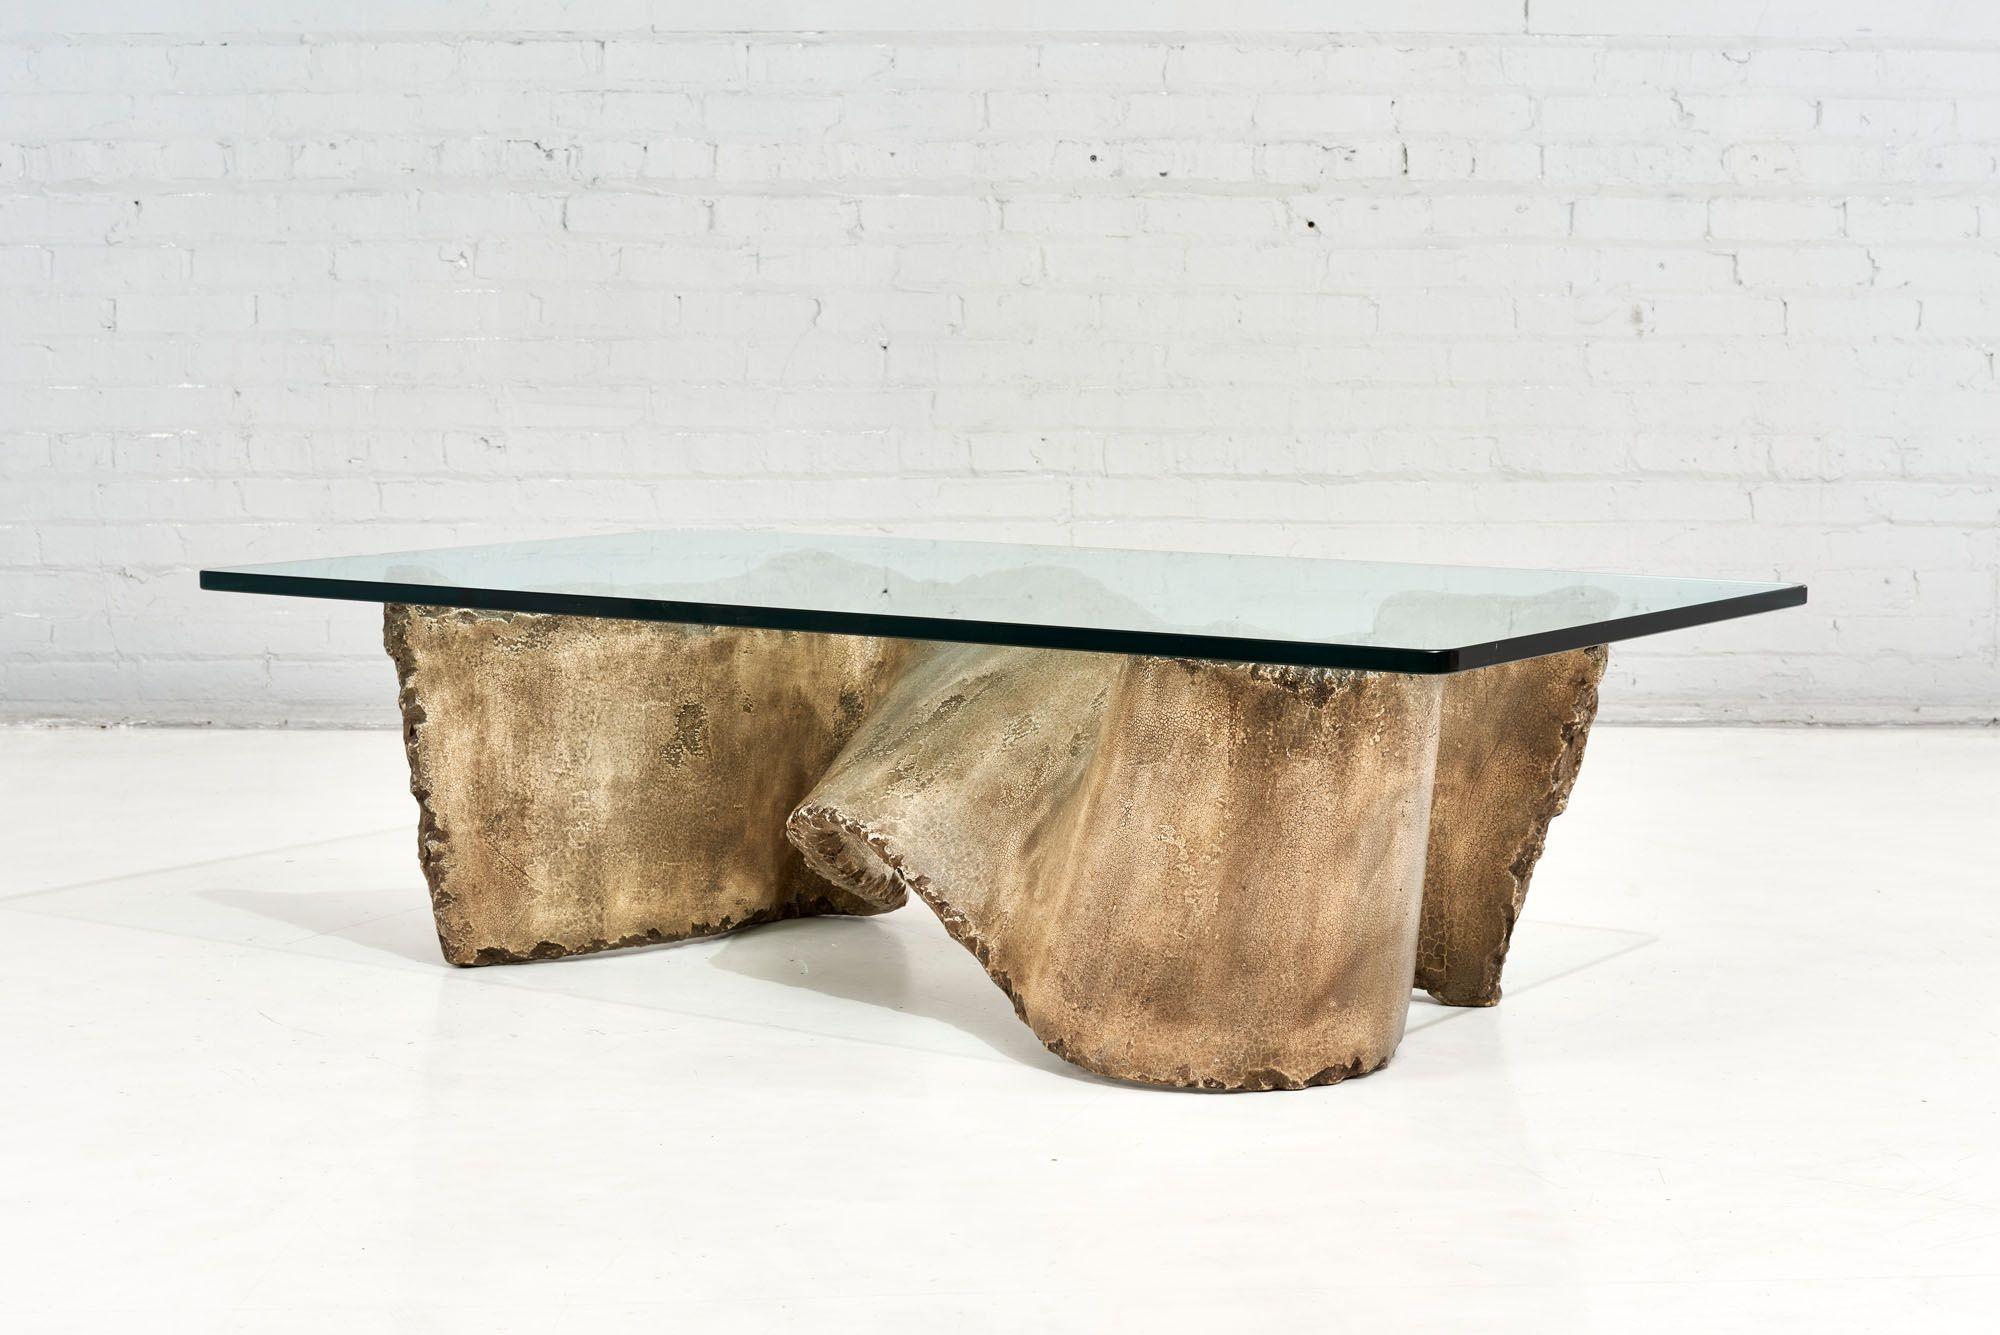 Faux Stone “Miro” sculpture coffee table, Silas Seandel 1970. Fauc chiseled stone in ribbon form with glass top.